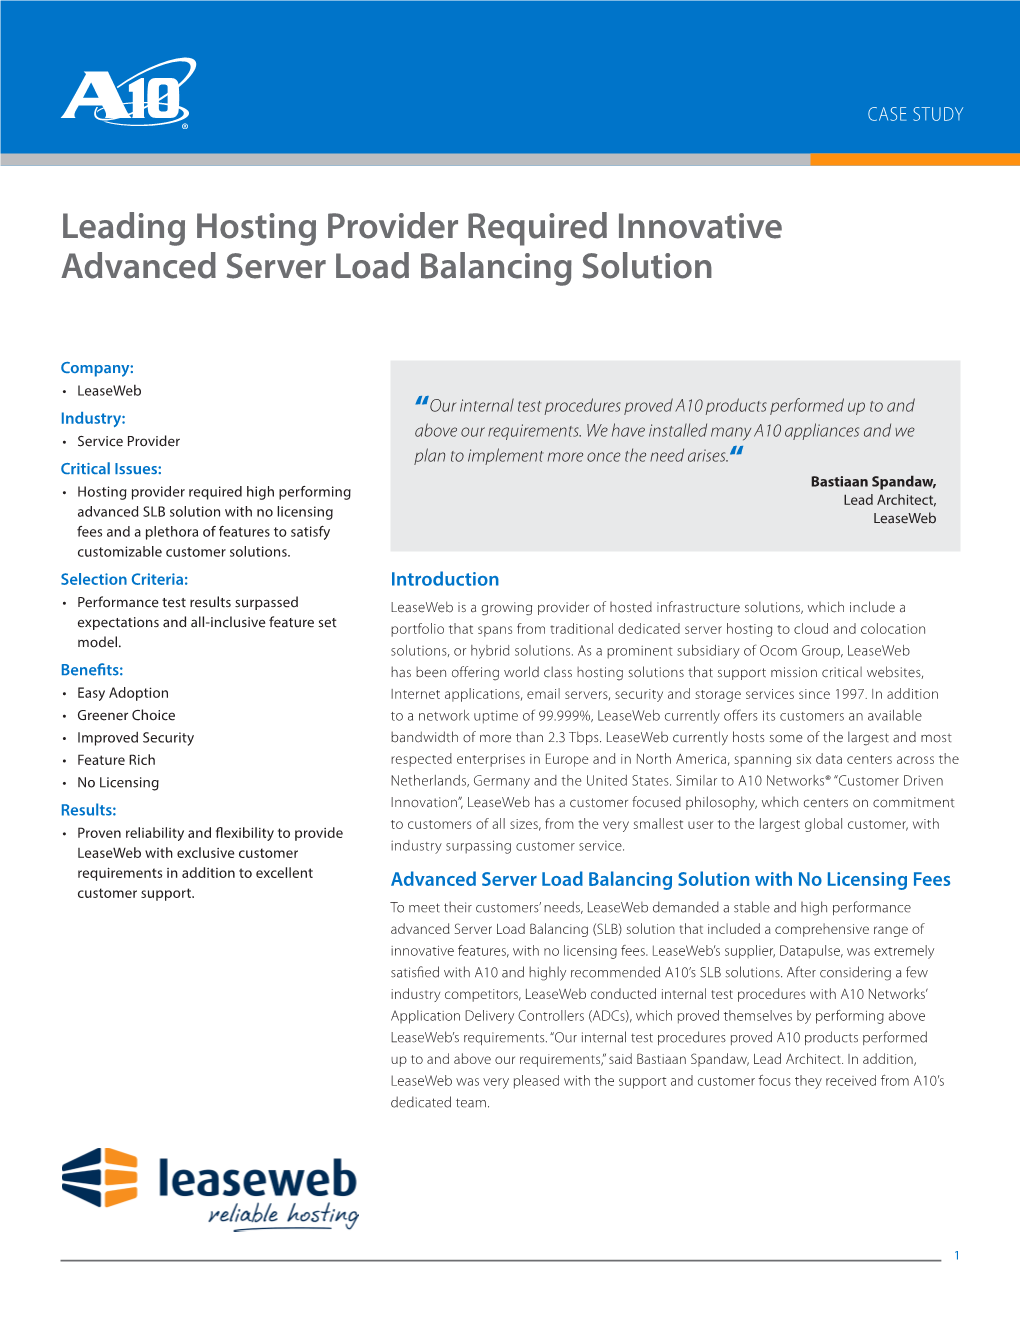 Leading Hosting Provider Required Innovative Advanced Server Load Balancing Solution